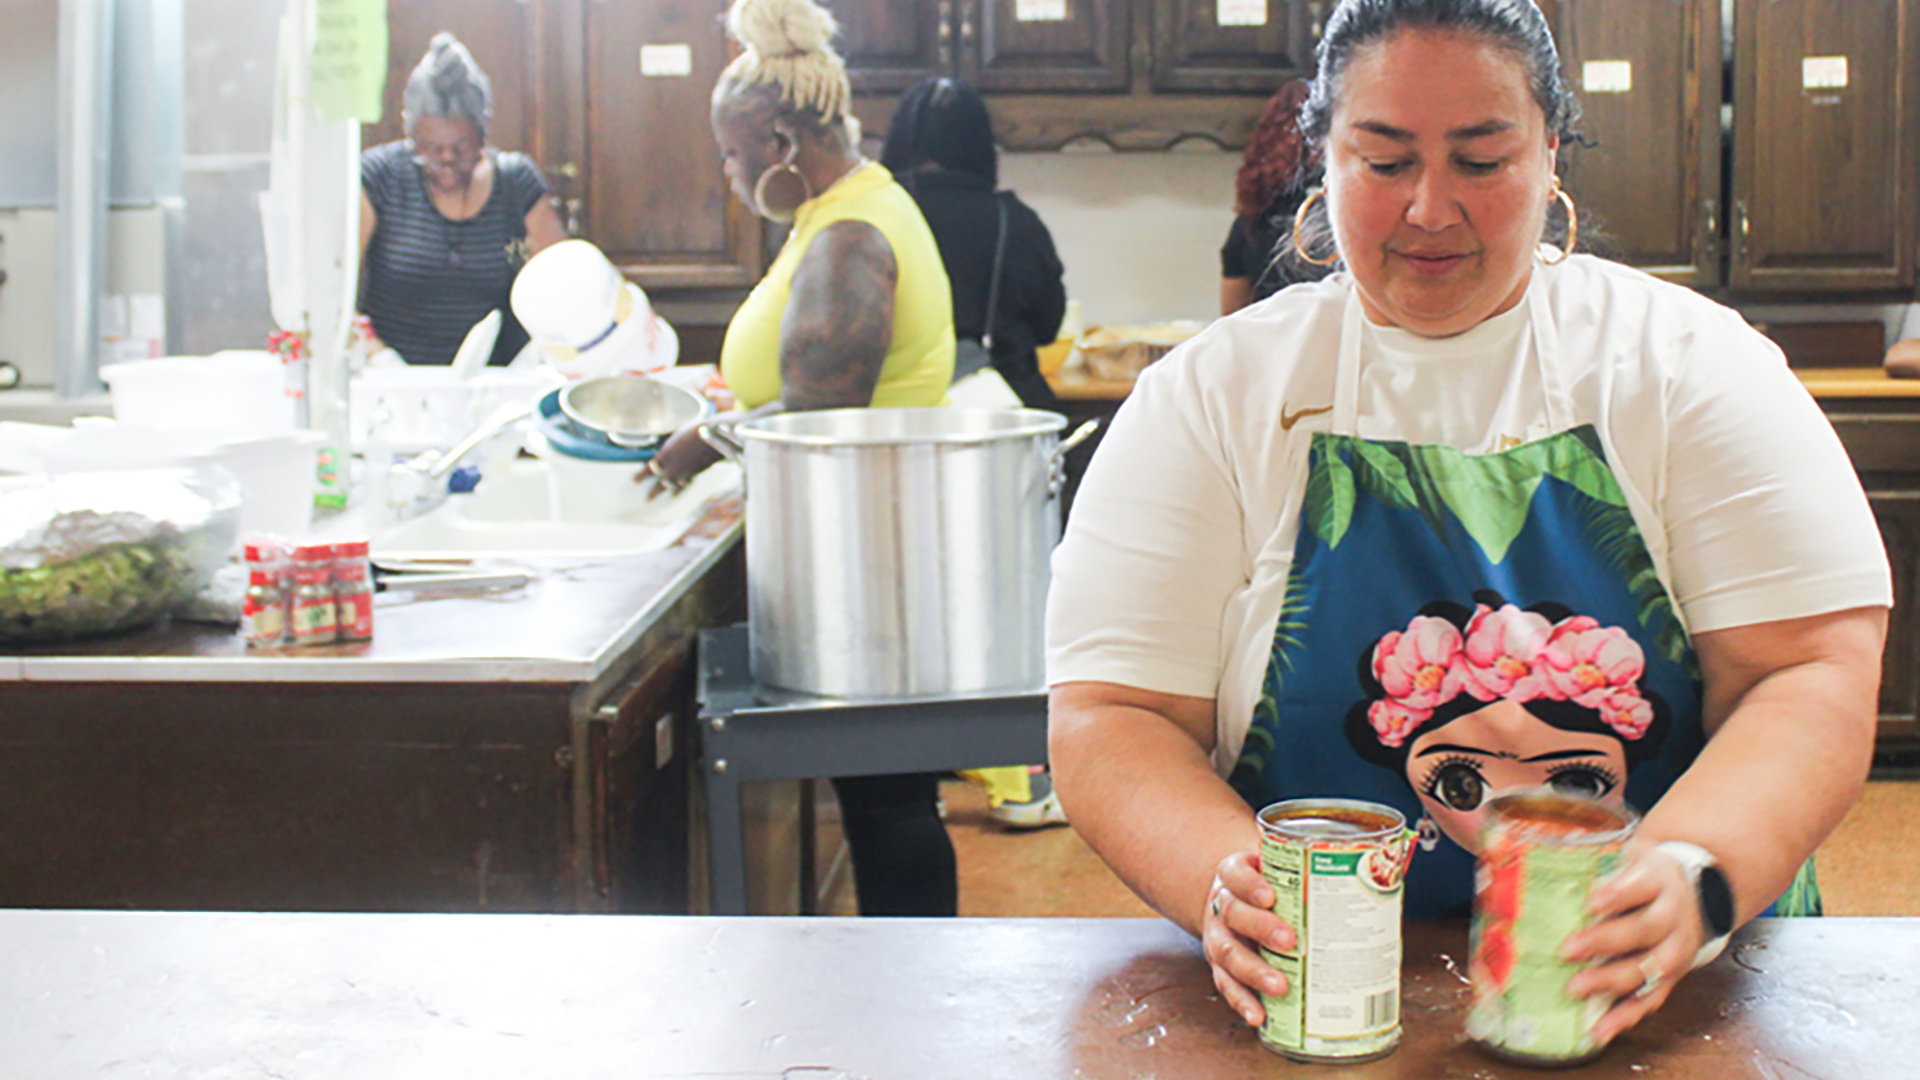 Maria Beltran holds two open items of canned food on a countertop in an institutional kitchen space, with other people in the background handling cooking implements and food storage containers on an island countertop and another counter along a row of cabinets in the background.